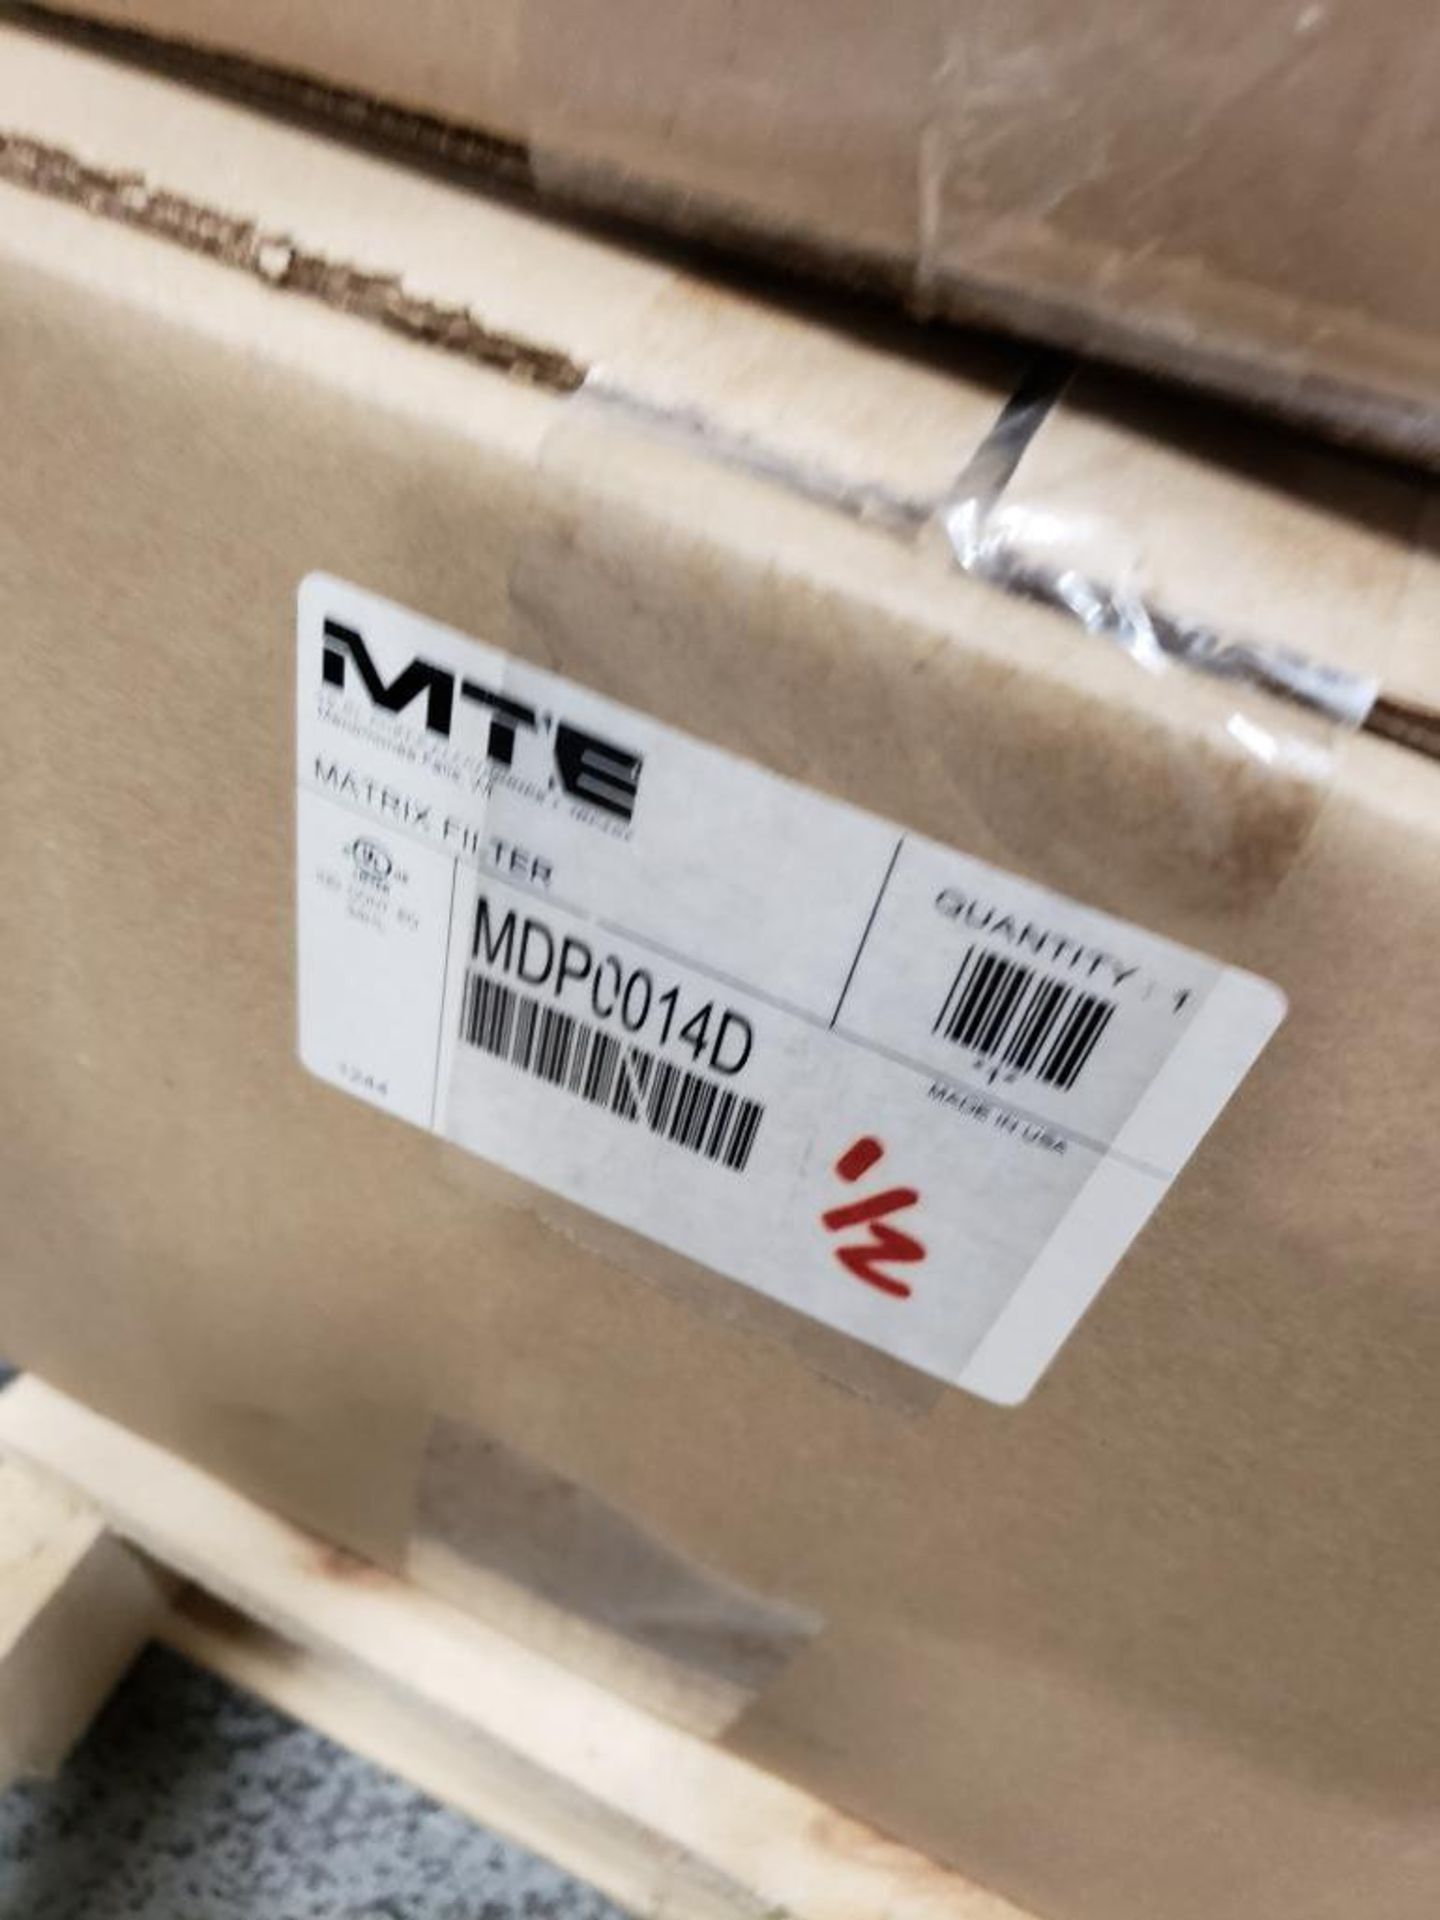 Qty 2 - MTE matrix filter model MDP0014D. New in boxes. - Image 7 of 8